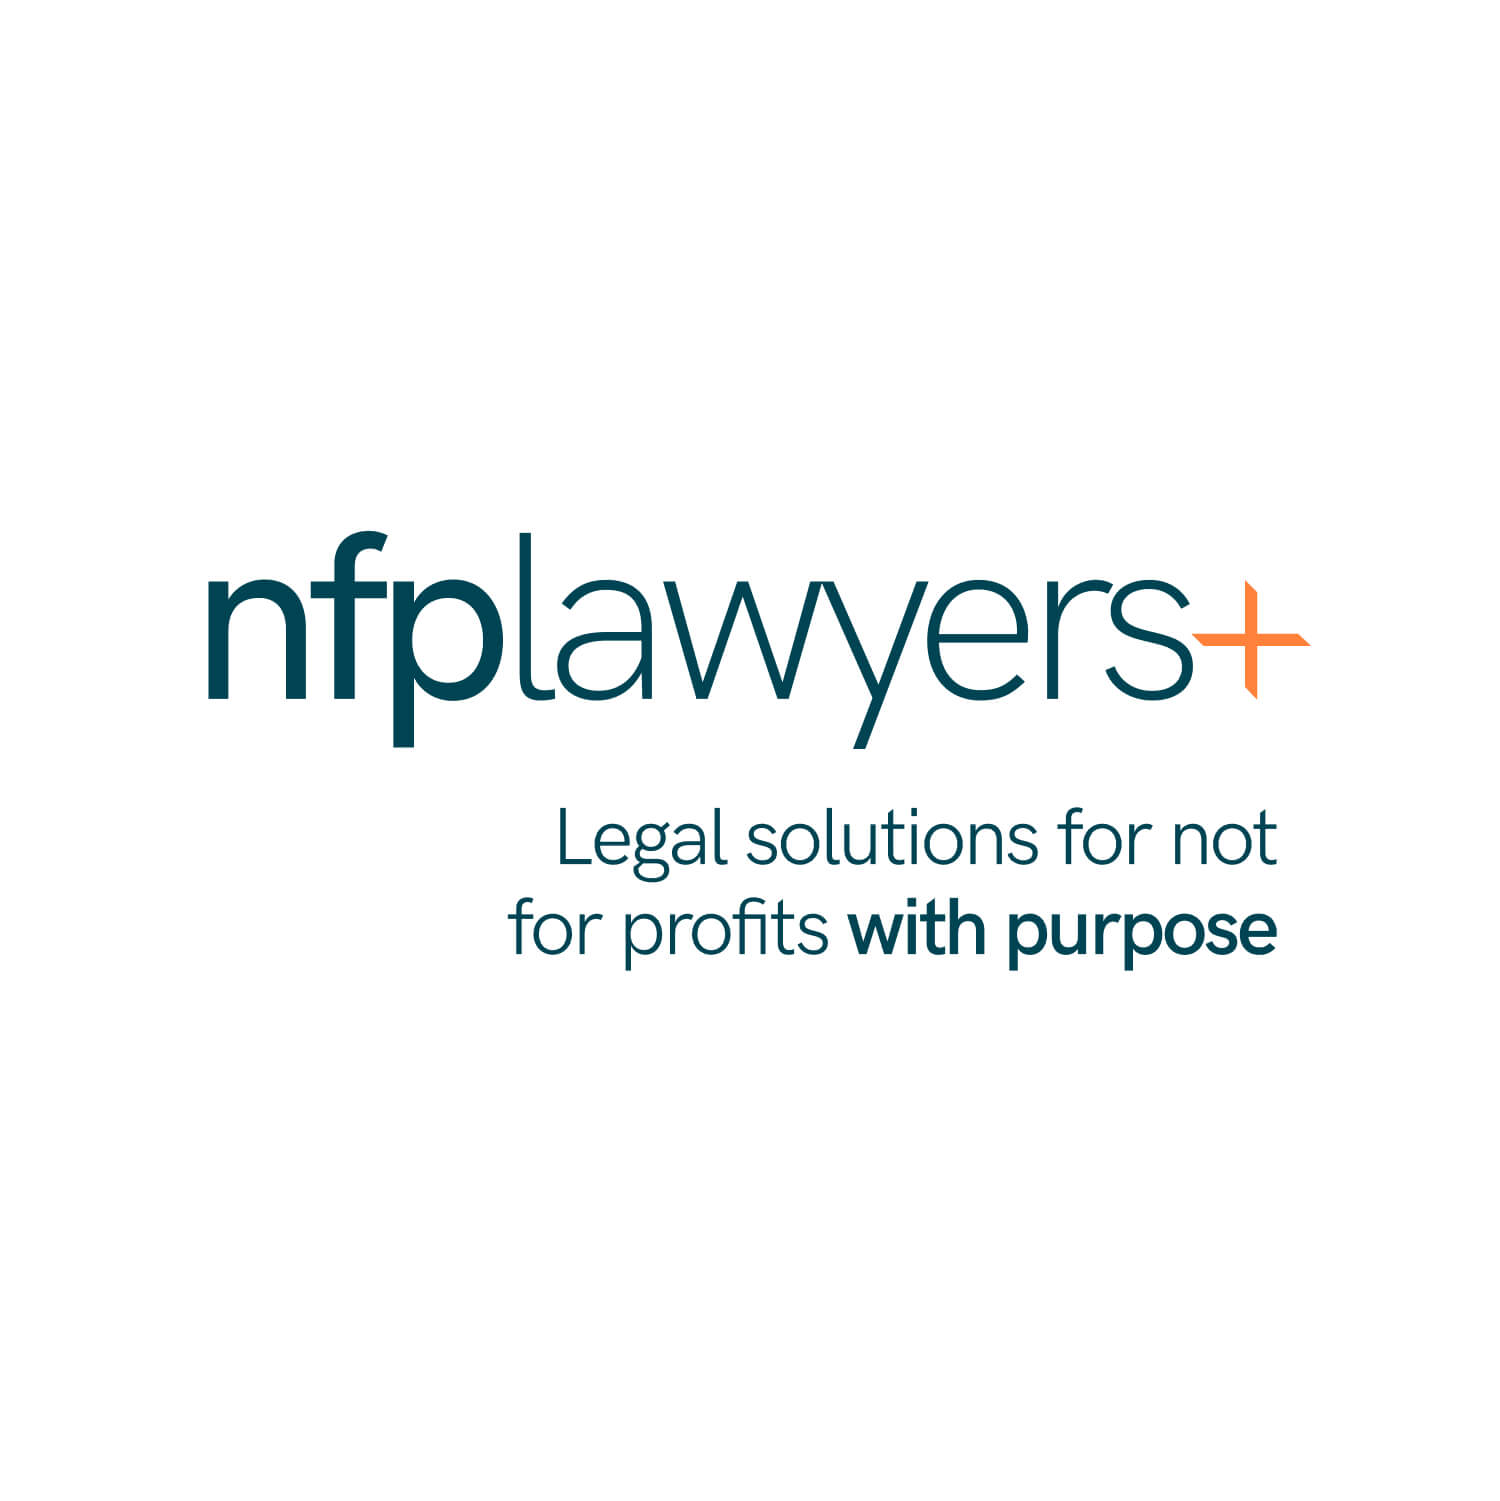 NFP Lawyers